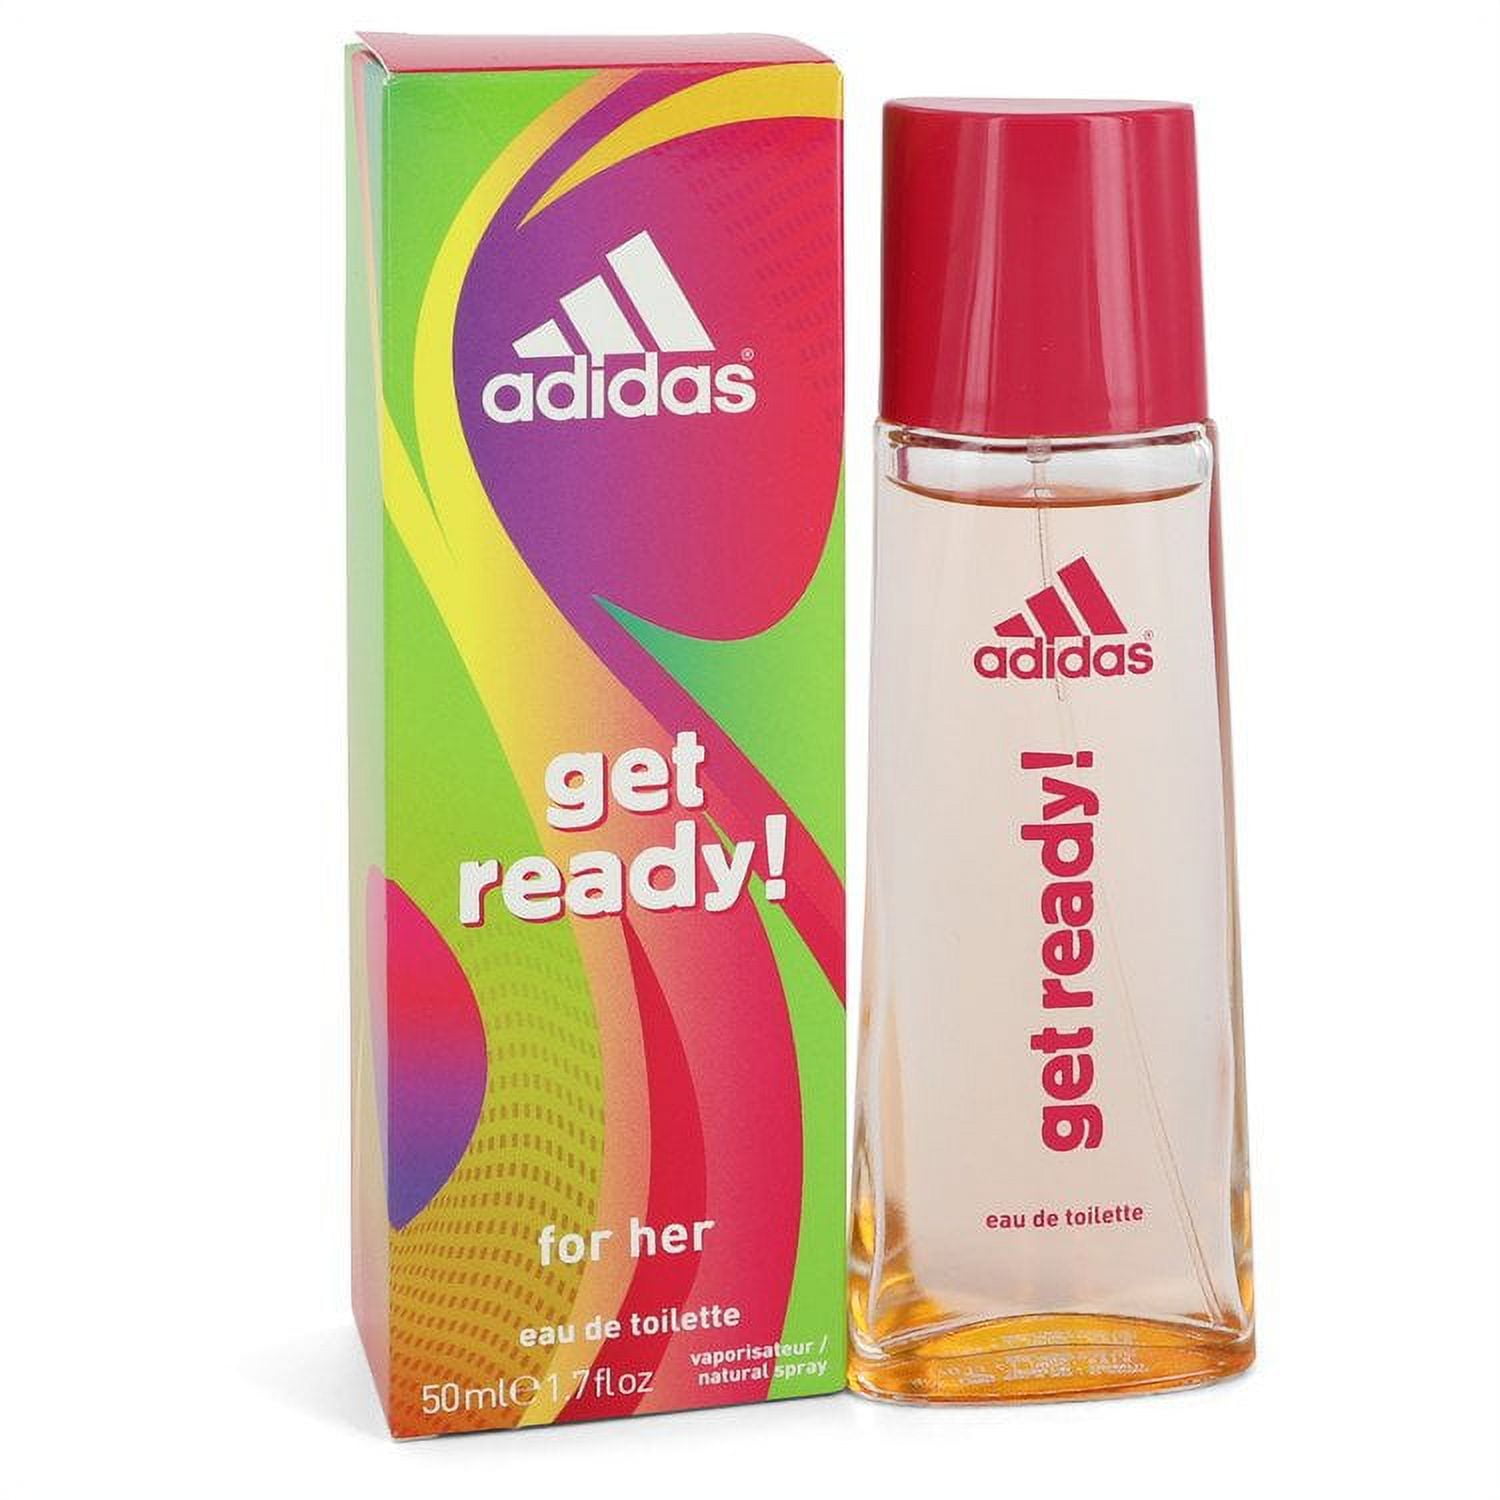 ADIDAS get ready! for her eau de toilette natural spray – Brands and Beauty  Cosmetics